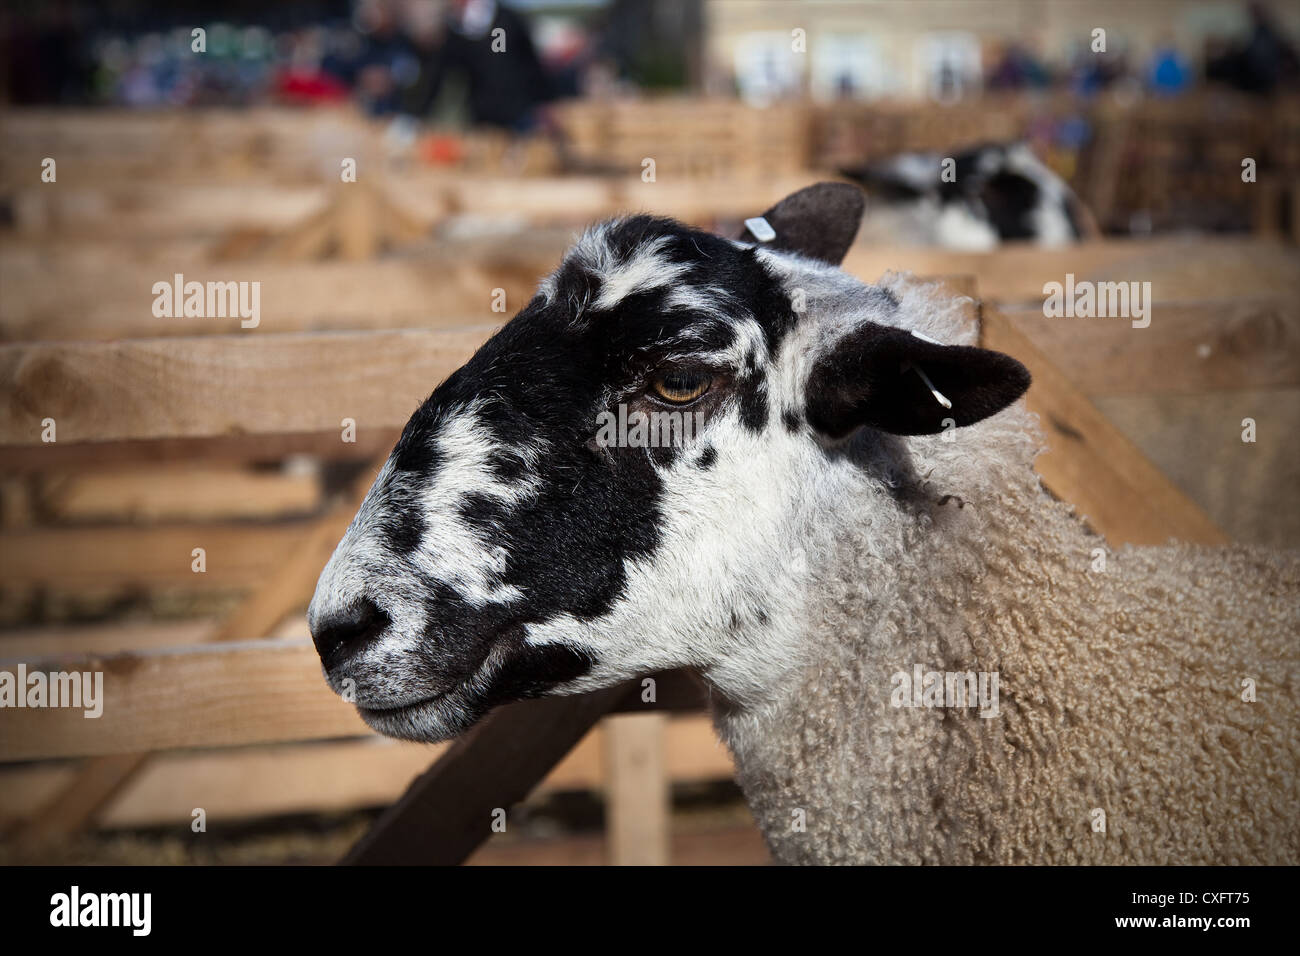 Head detail of Bluefaced Leicester Mule; Sheep Breeds at the Masham Sheep Fair, North Yorkshire Dales, UK Stock Photo